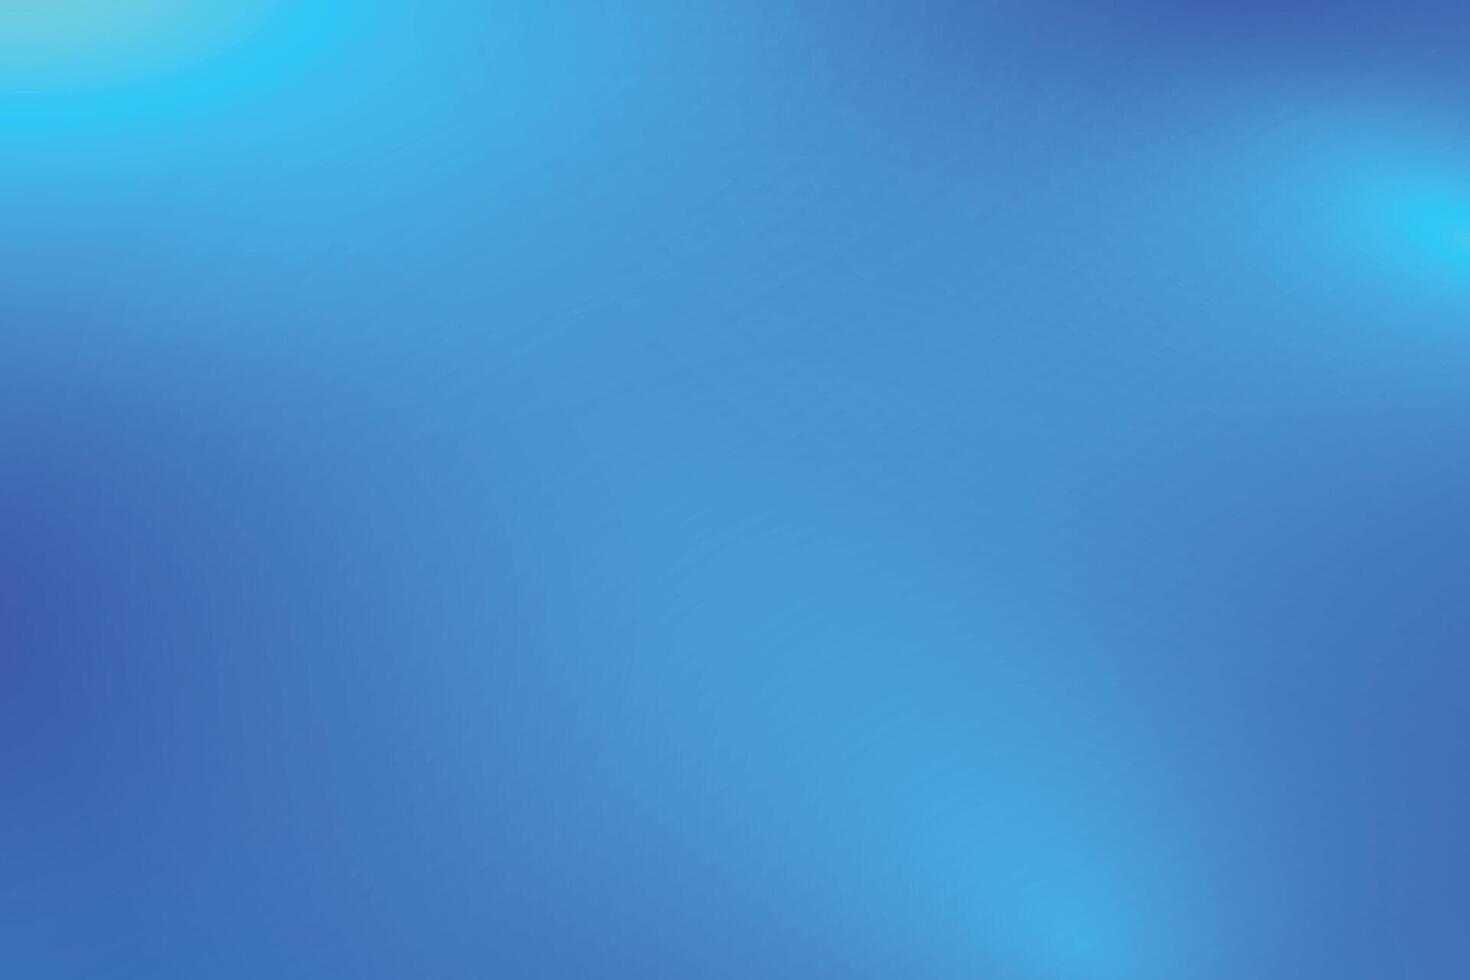 minimal style blue gradient abstract wallpaper with blur effect vector